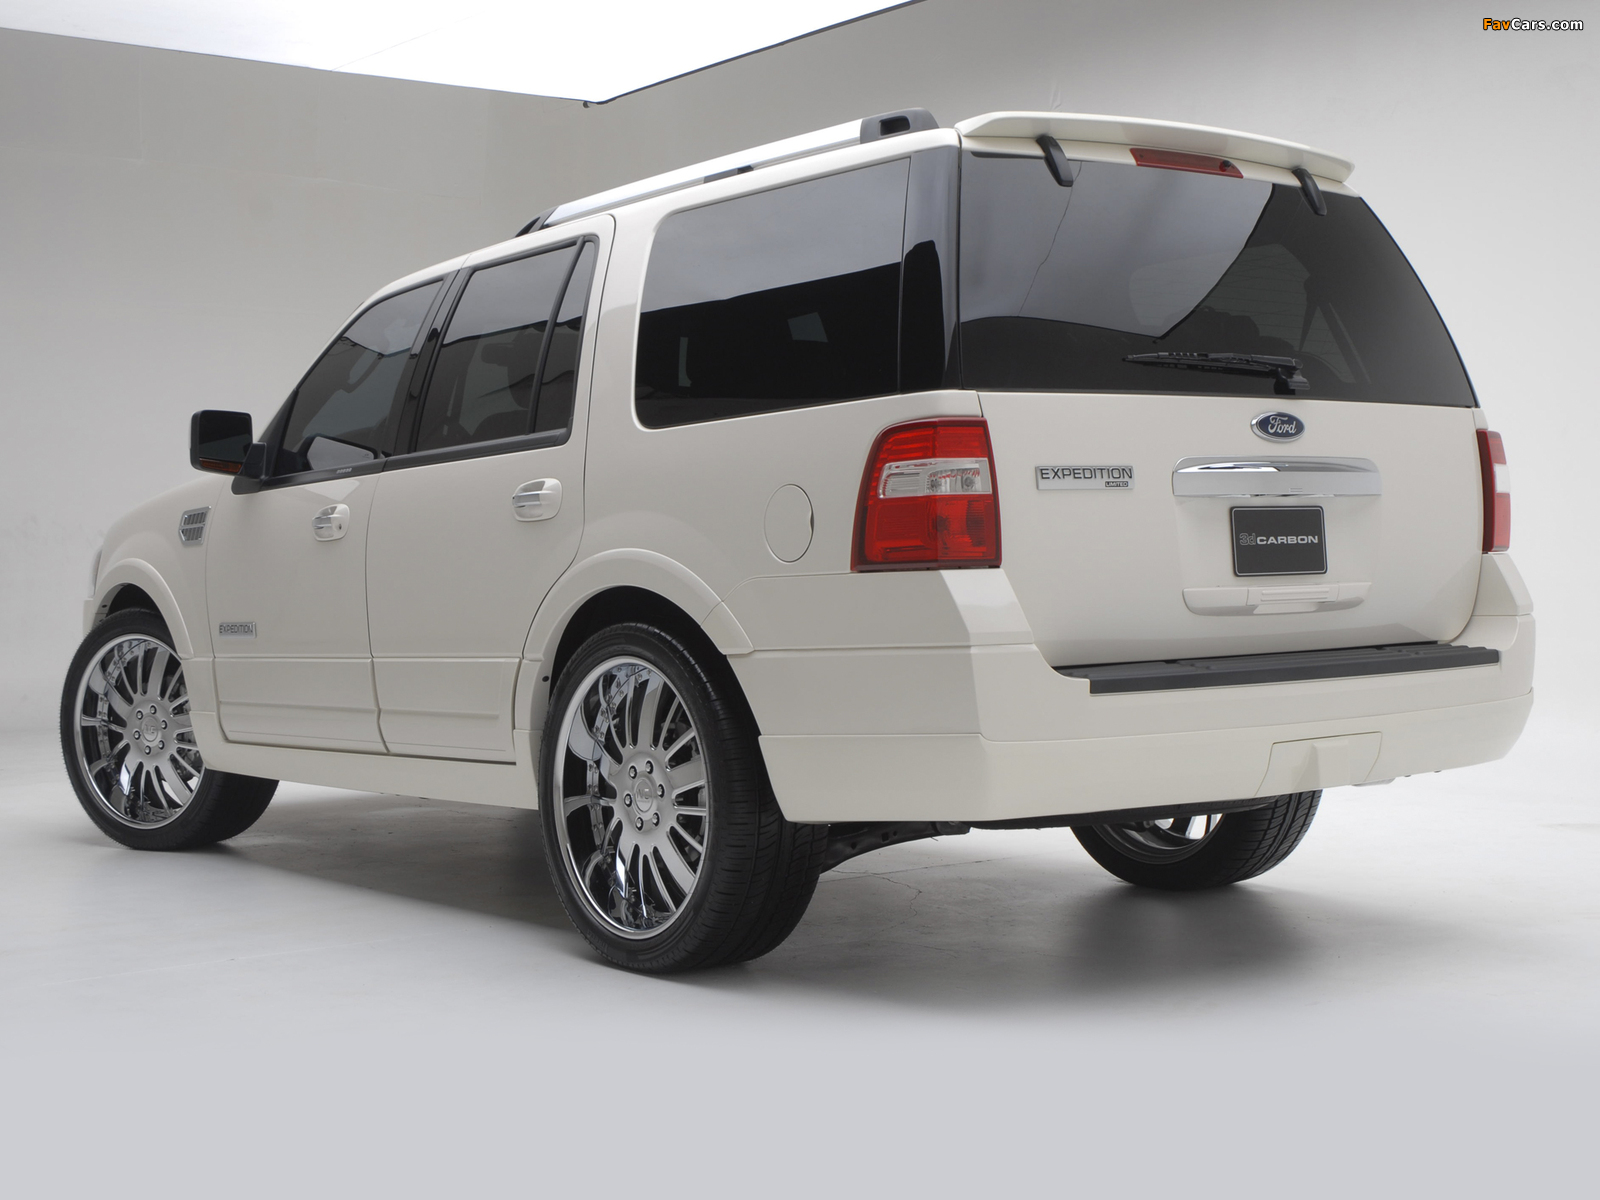 Ford Expedition Urban Rider Styling Kit by 3dCarbon 2007 images (1600 x 1200)